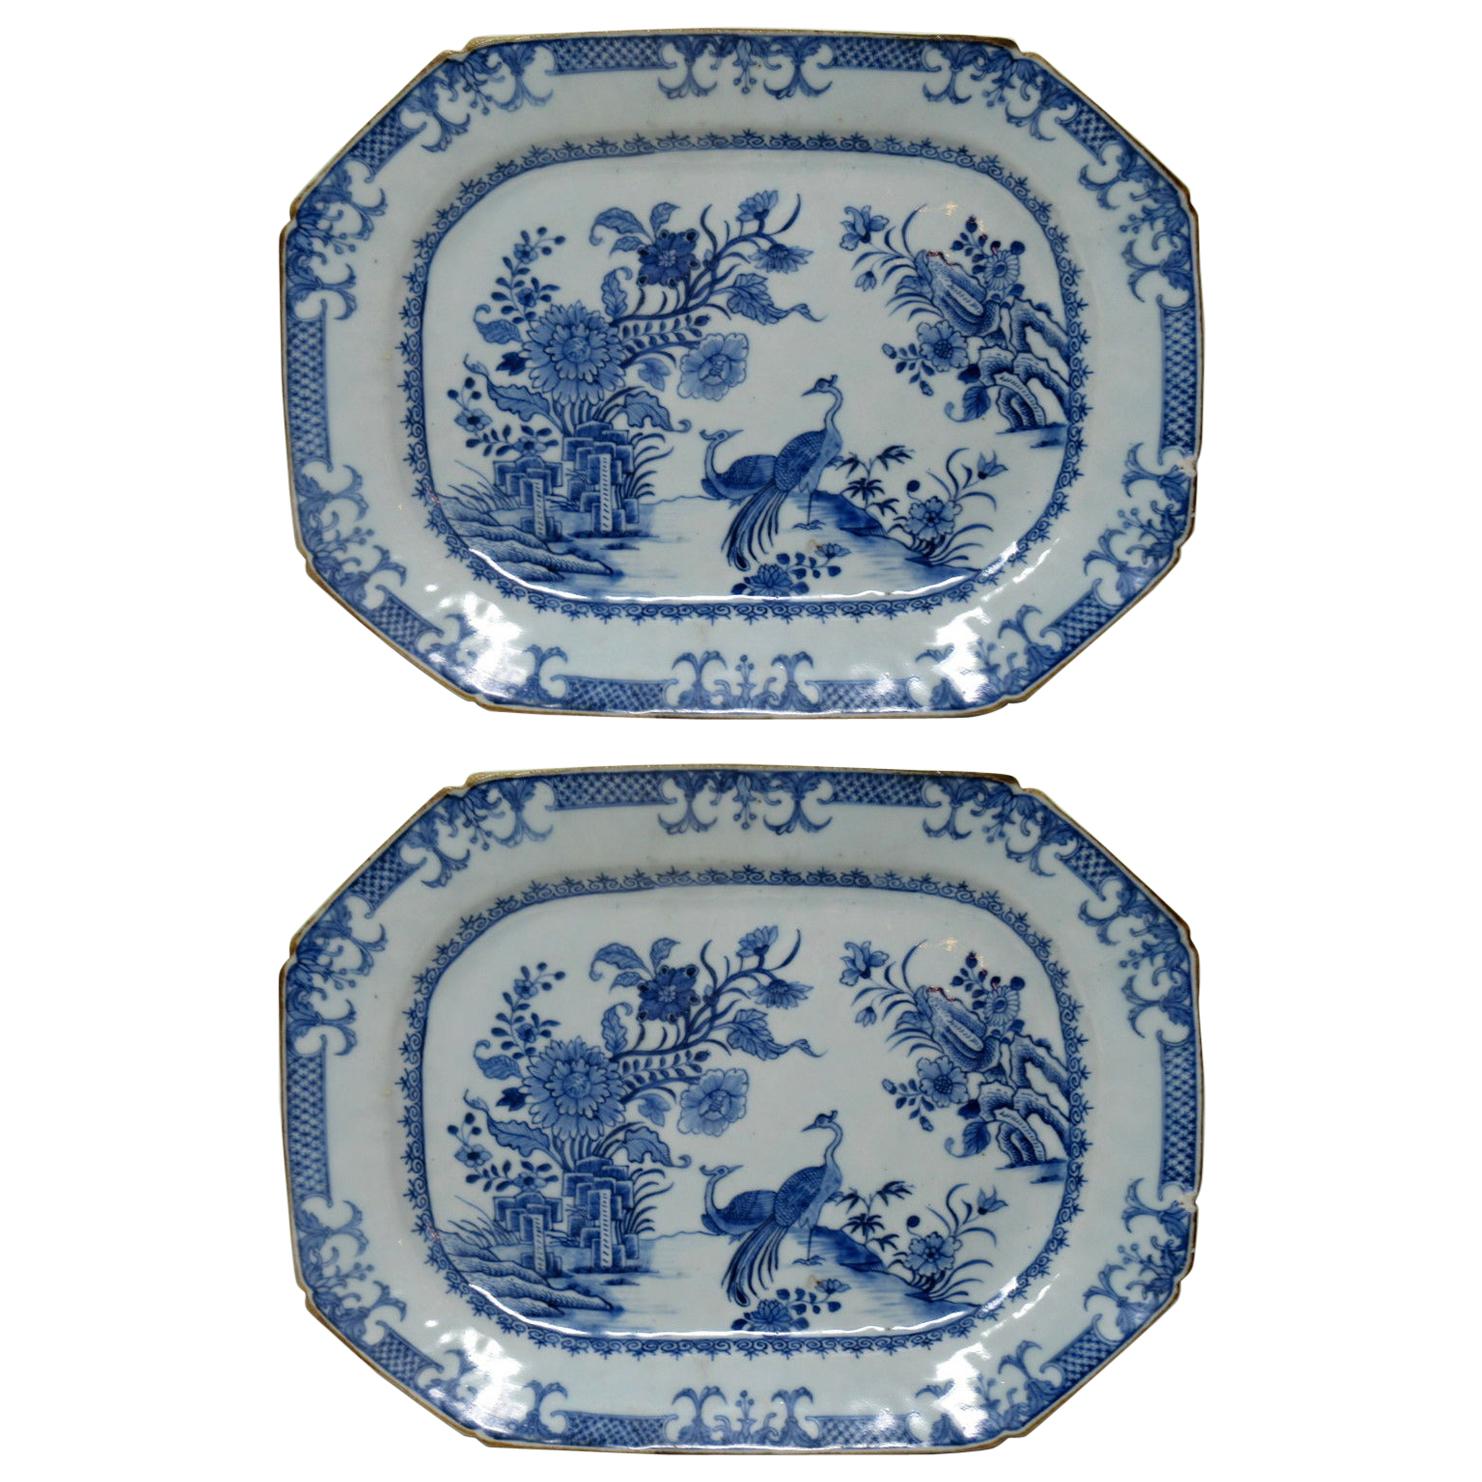 Chinese Canton Porcelain Blue White Plates Chargers Qianlong, 18th Century, Pair